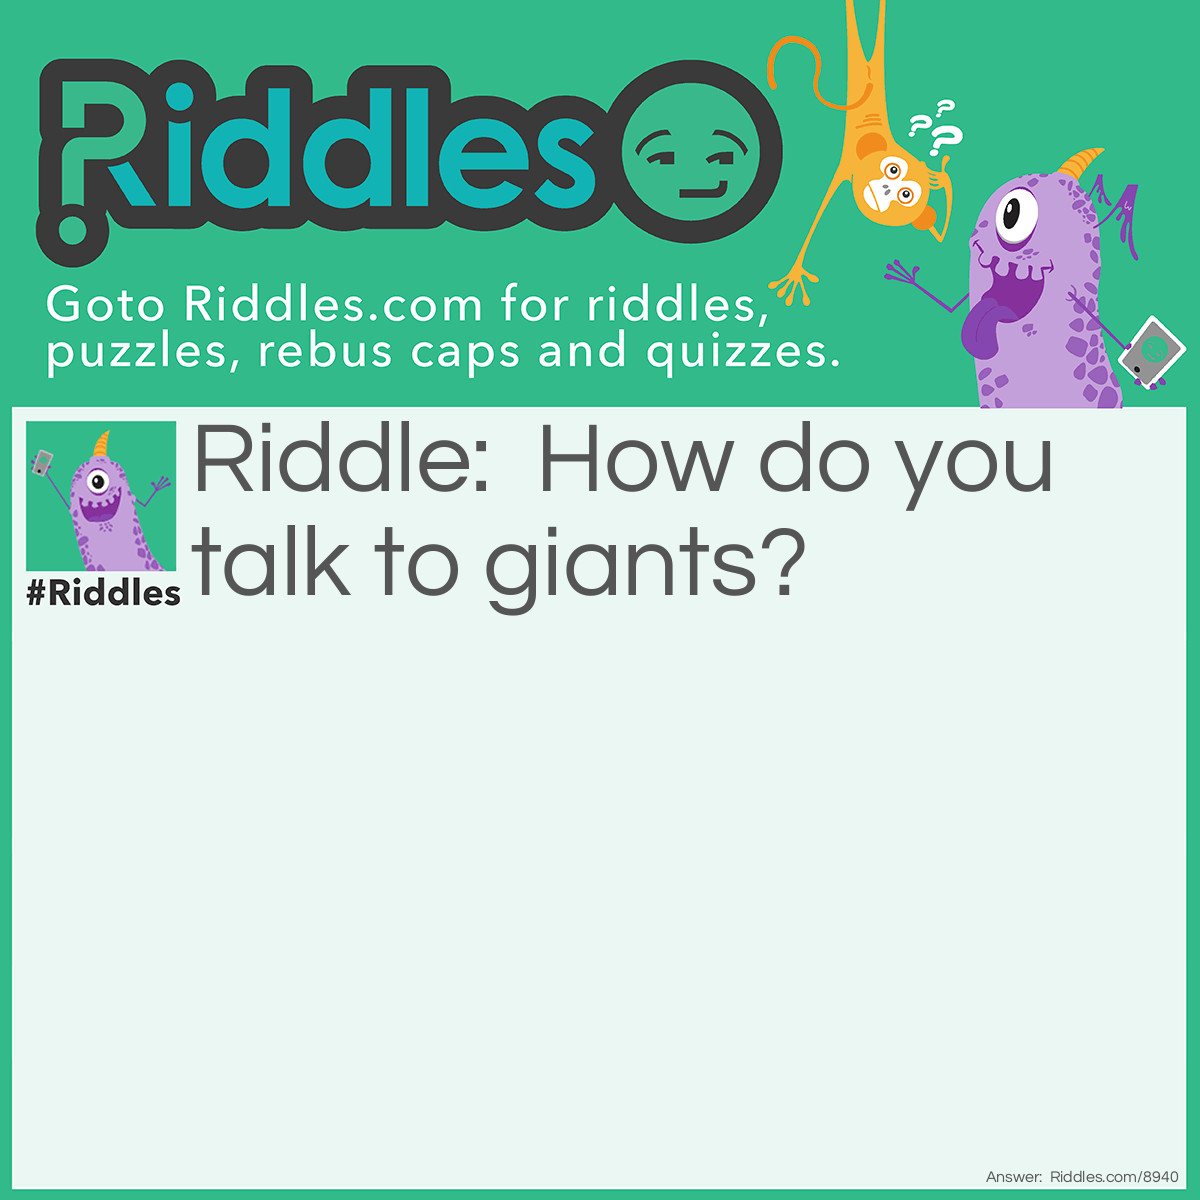 Riddle: How do you talk to giants? Answer: By using big words.